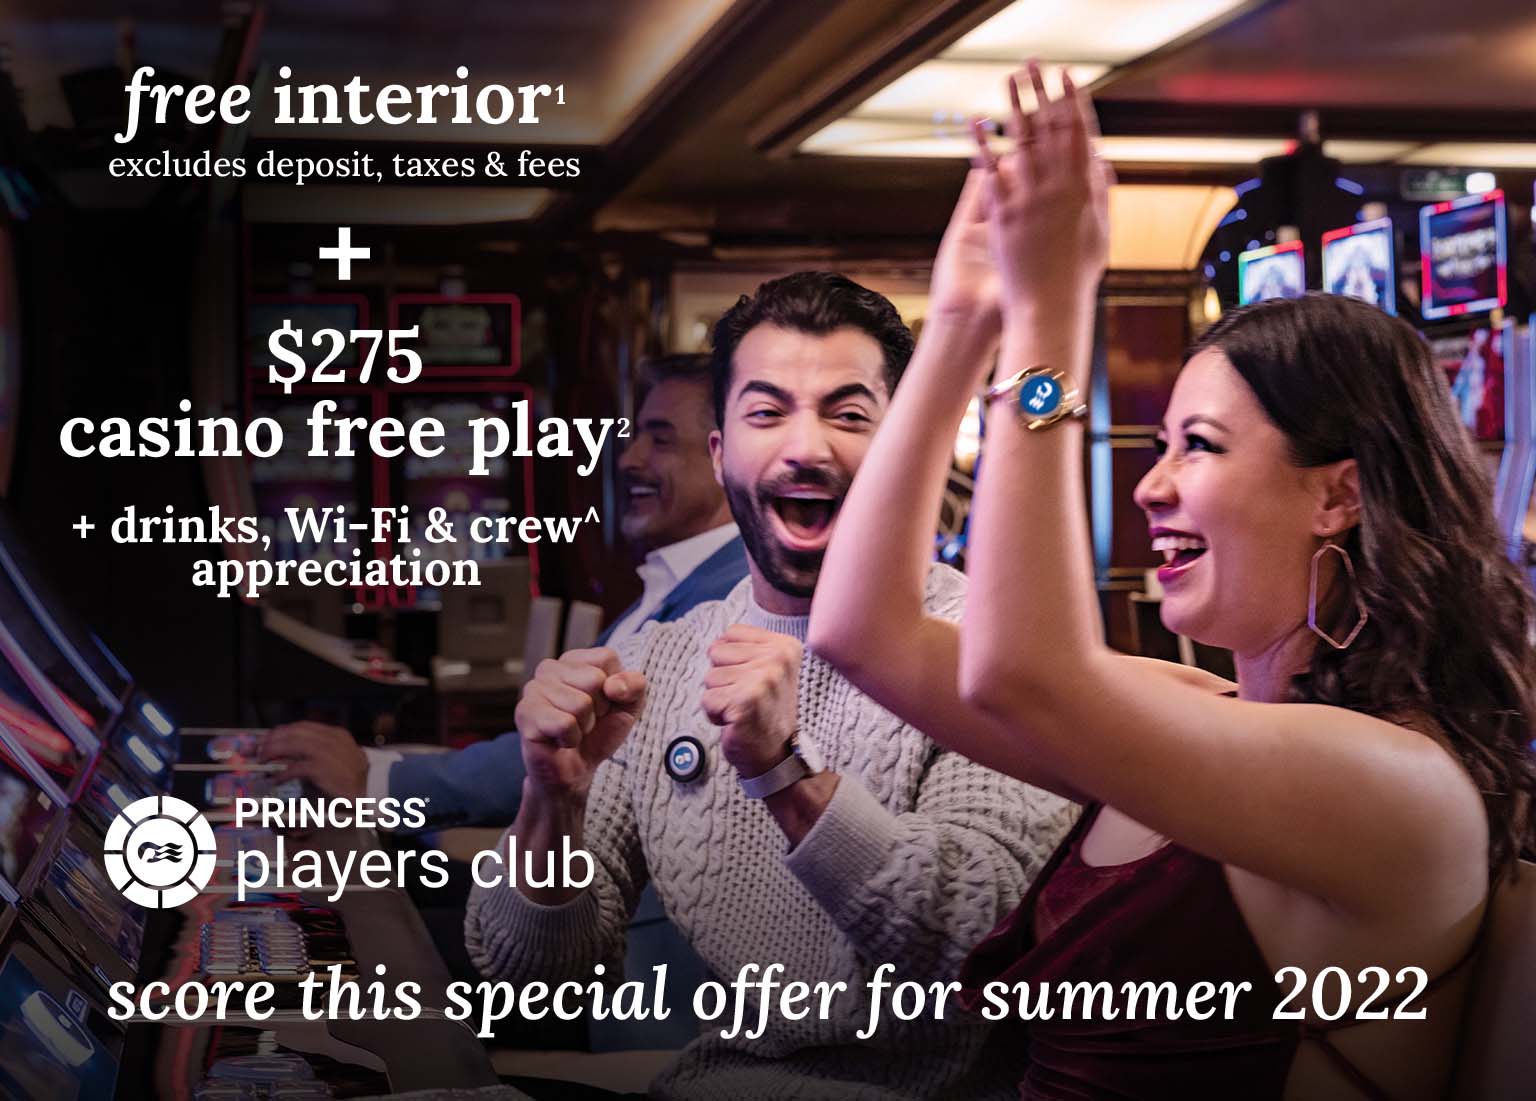 free interior stateroom + $275 casino free play + drinks, Wi-Fi & crew appreciation included. Click here to book.